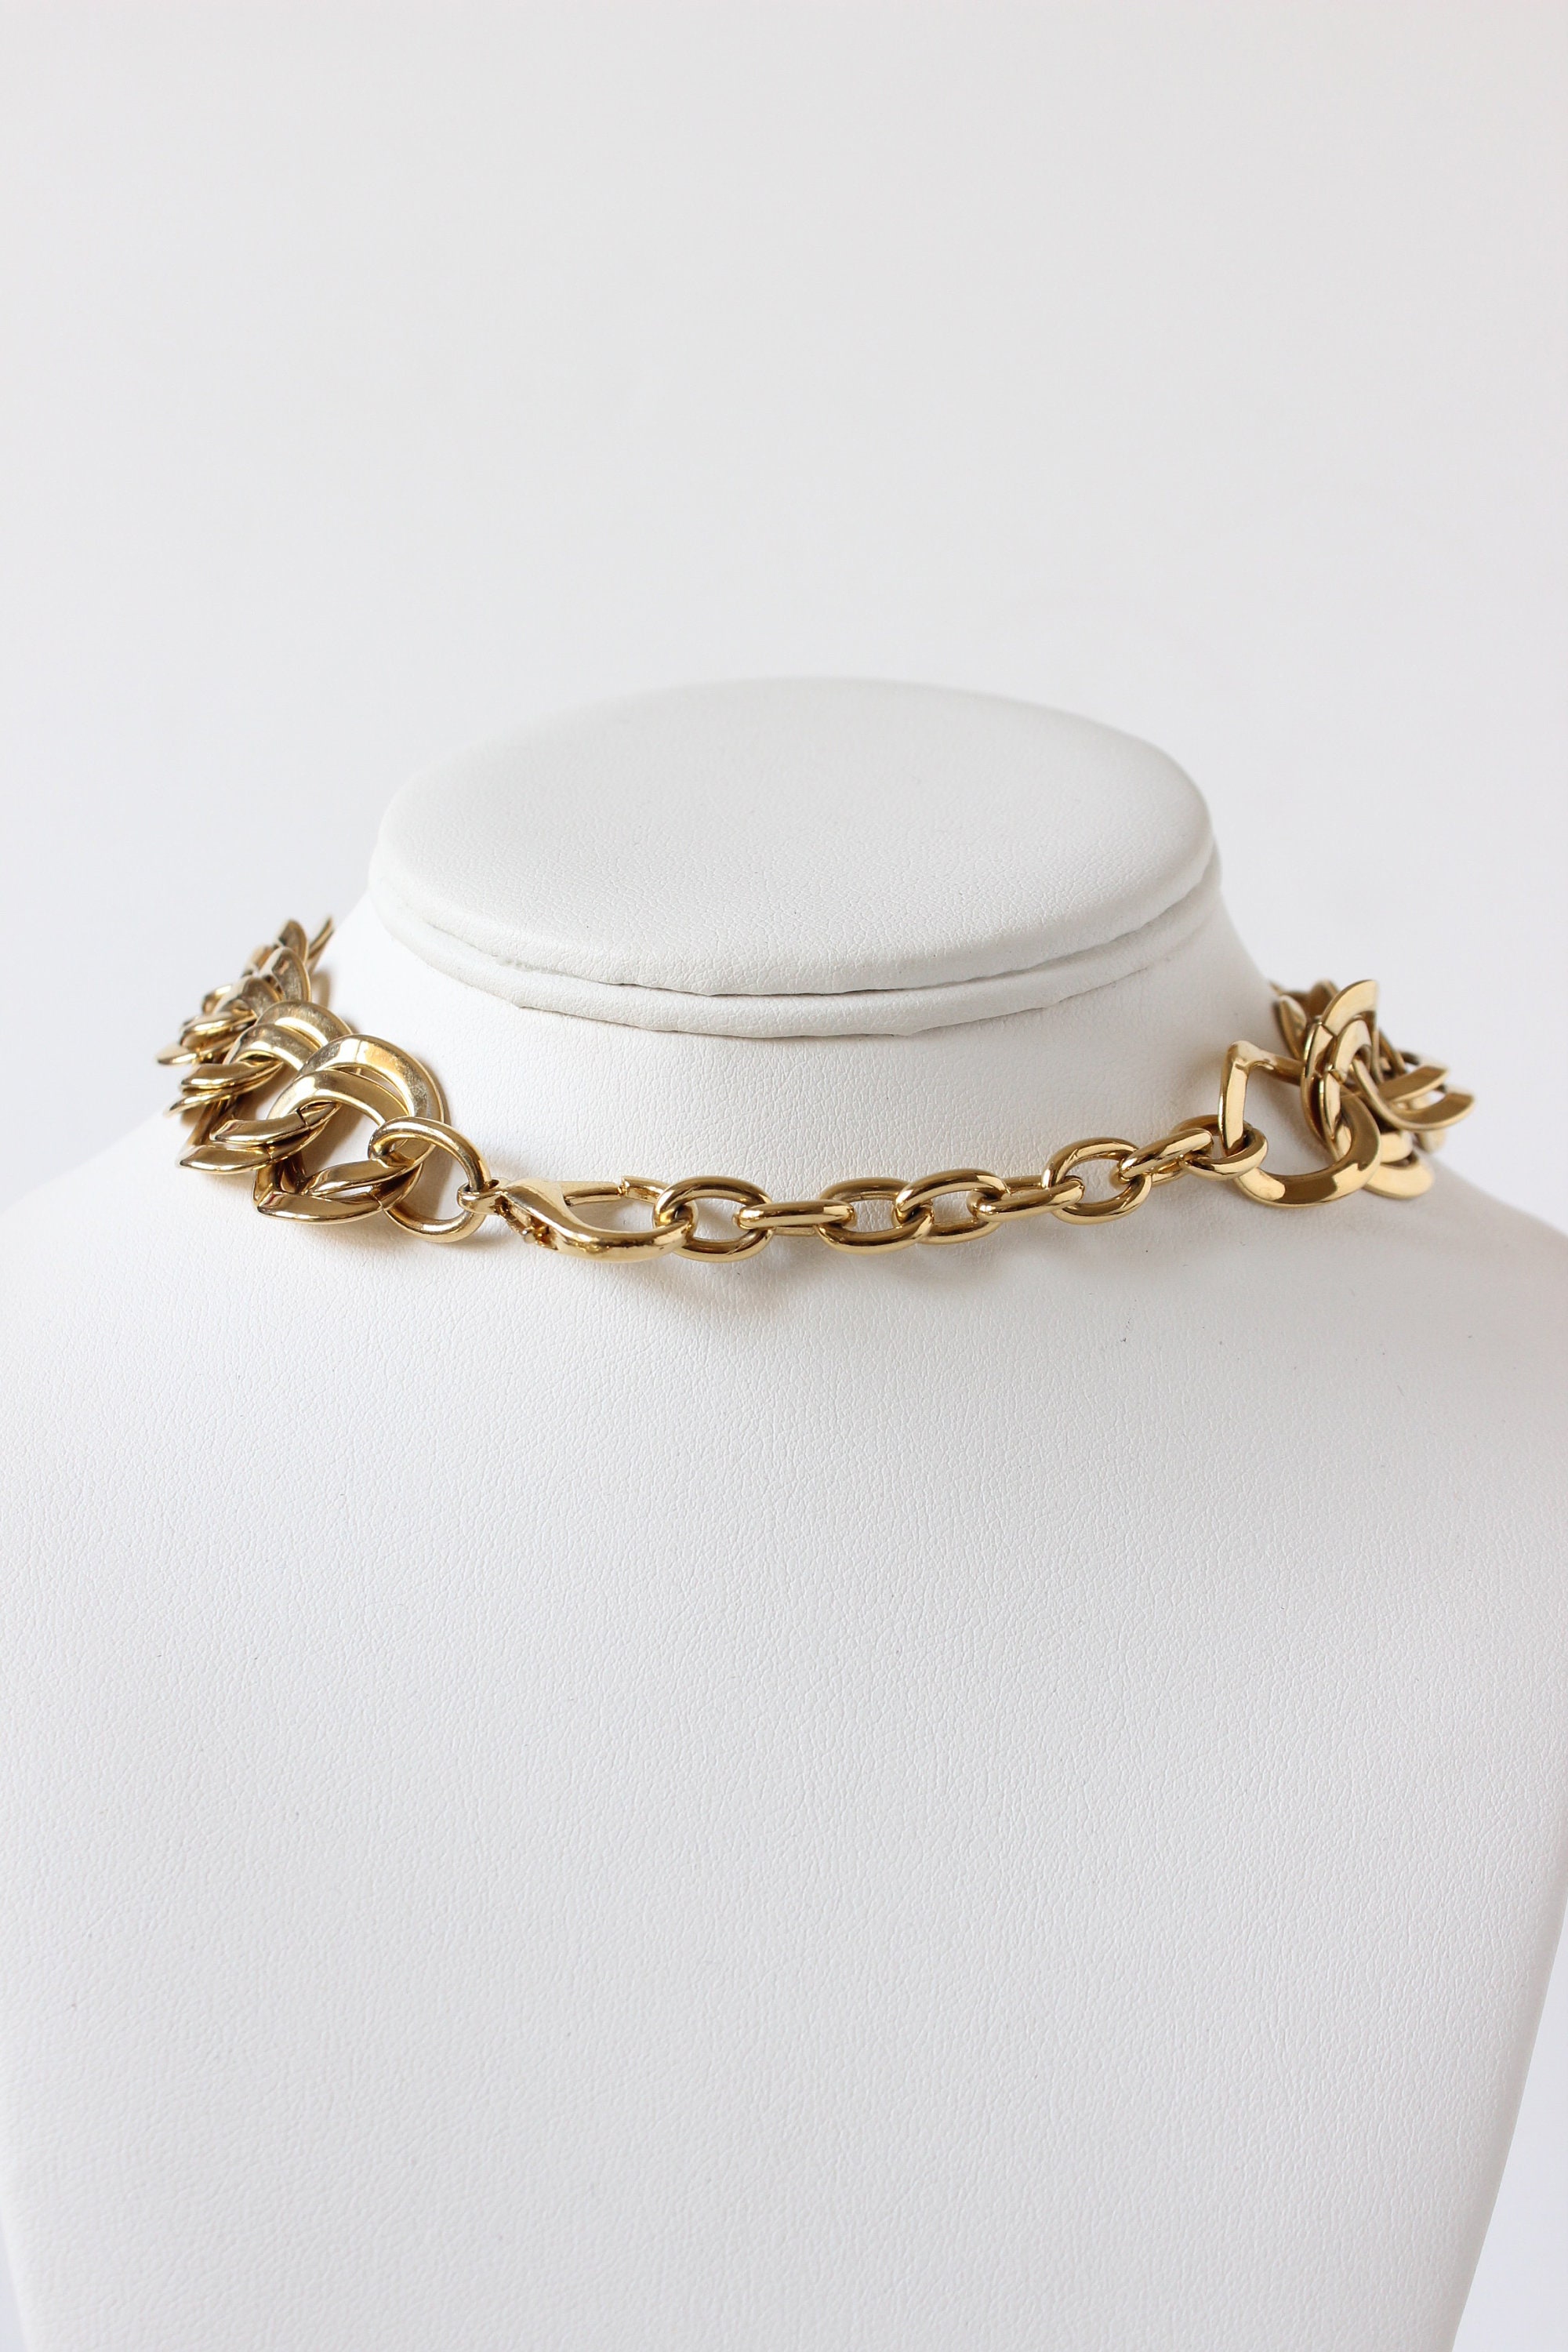 Chunky Vintage Chain Tone Gold - Necklace Etsy